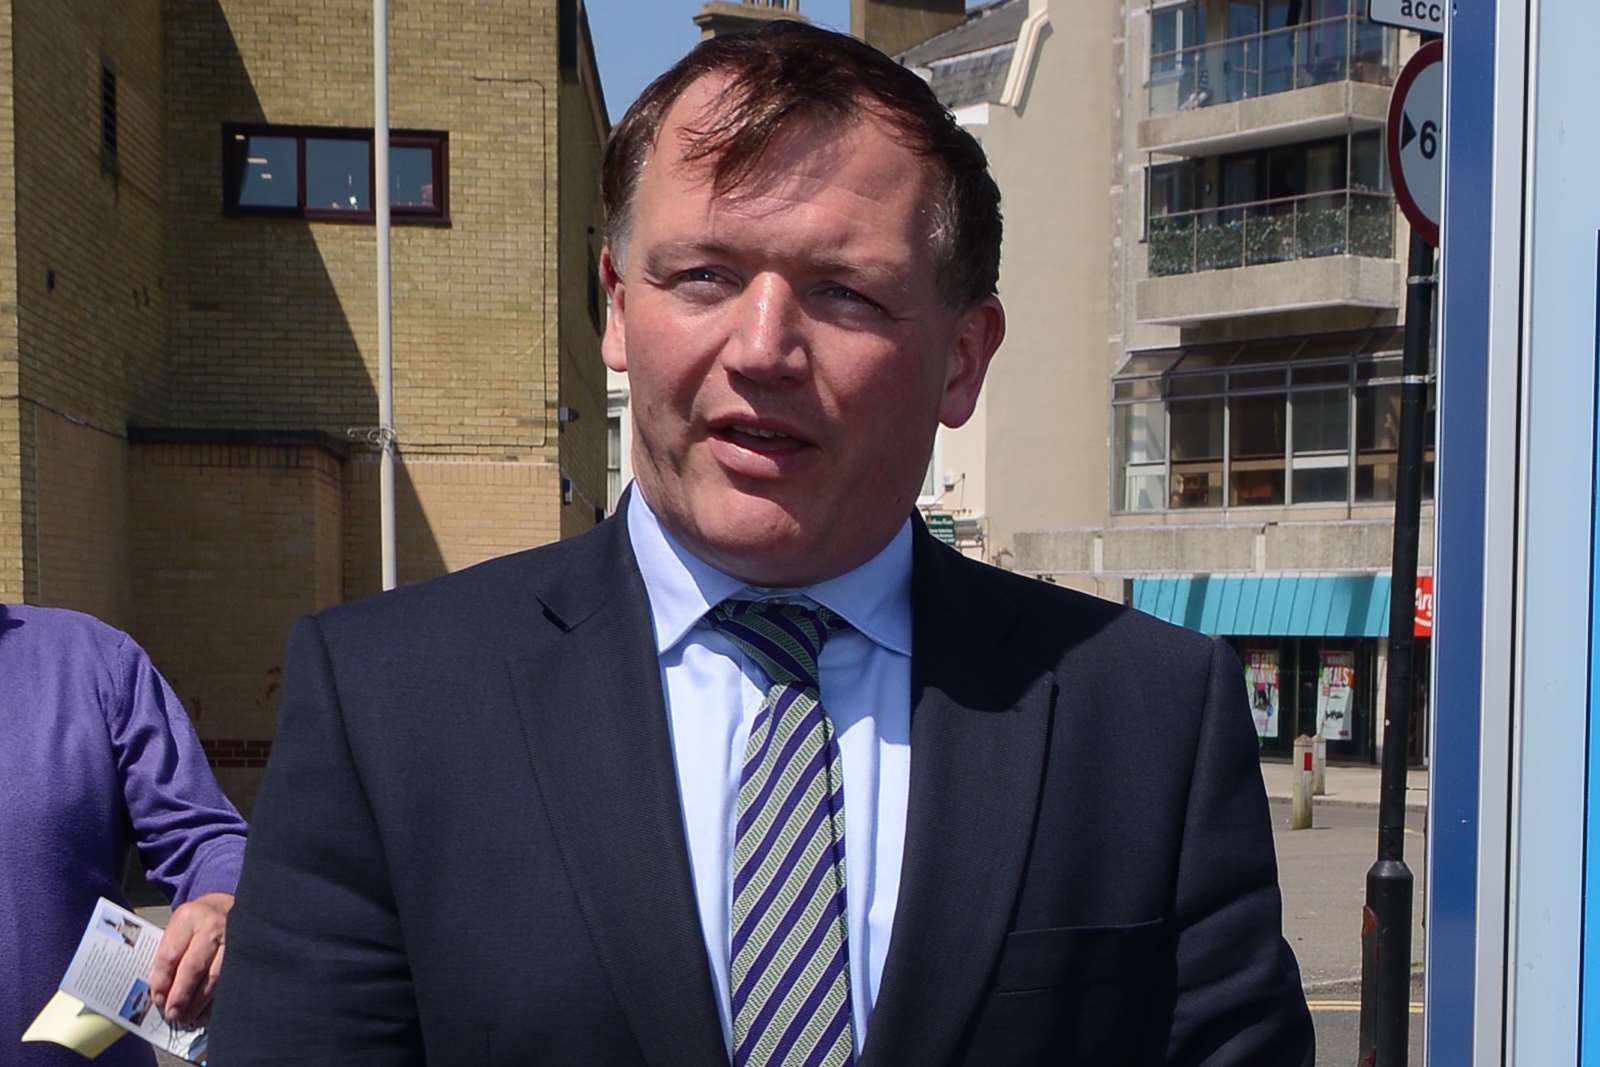 MP Damian Collins said the country needs a "period of reassurance"